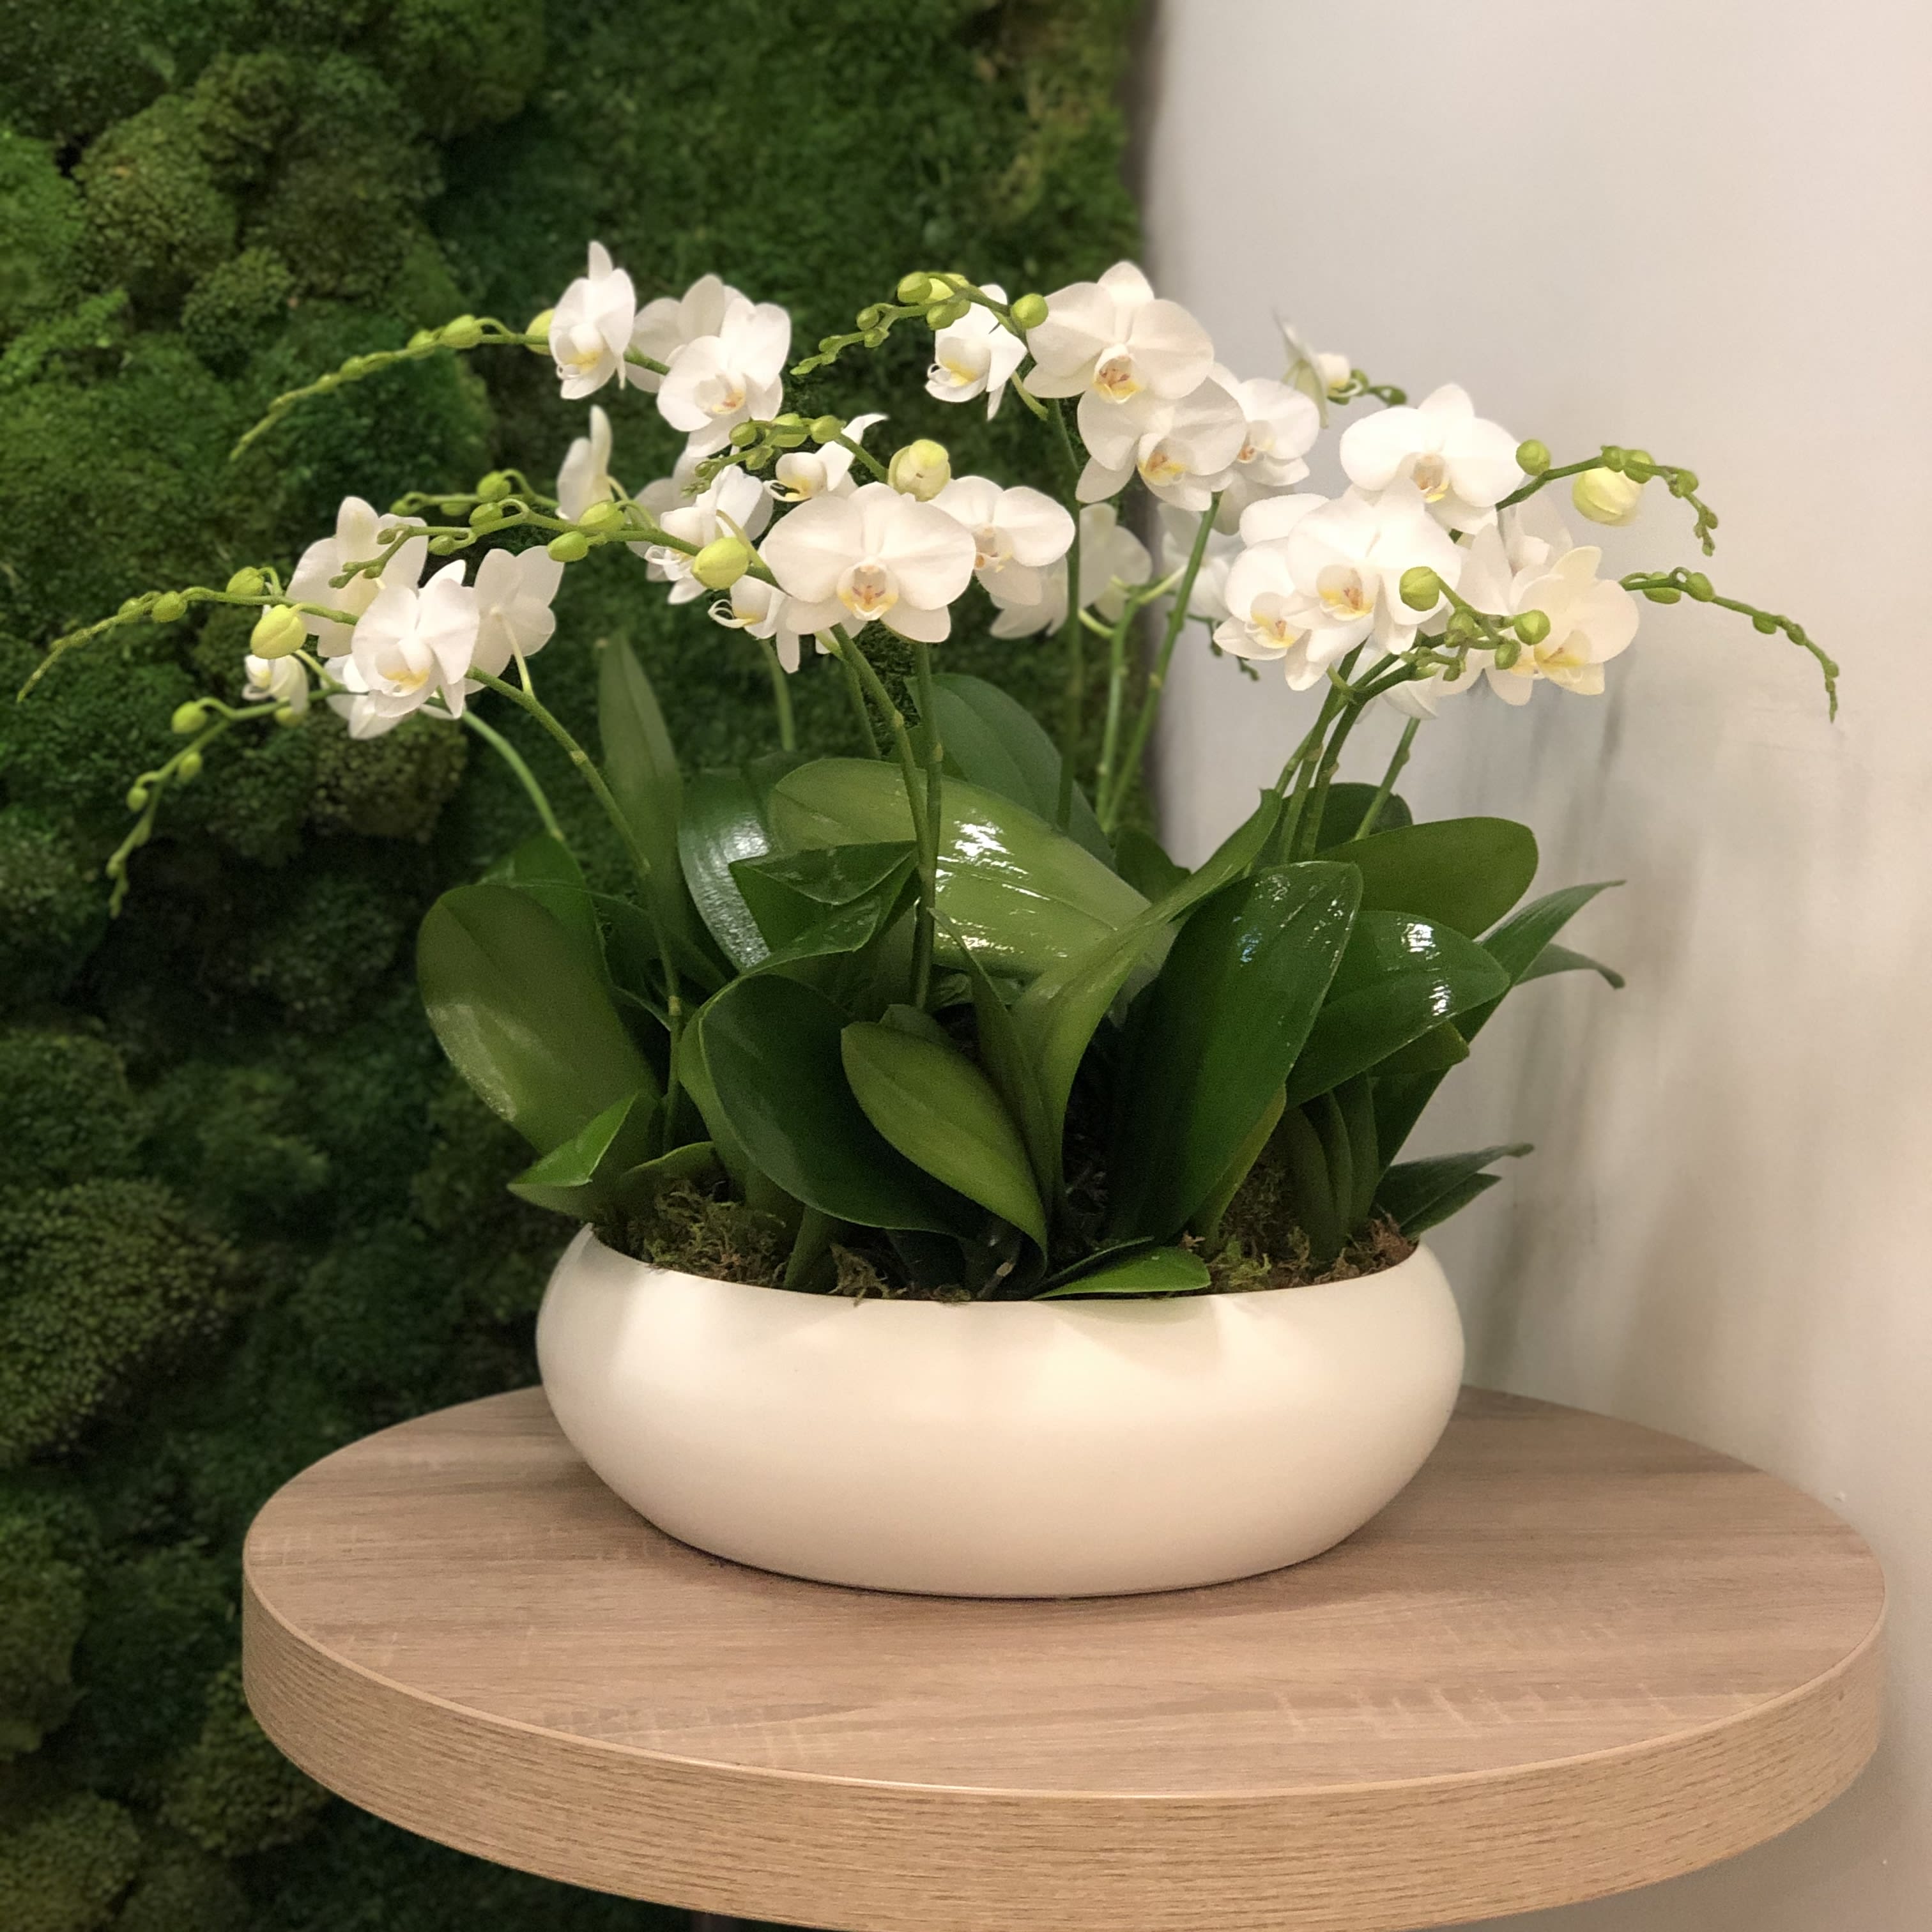 Mini Orchids - White mini orchid plants arranged in a white ceramic 15&quot; D container